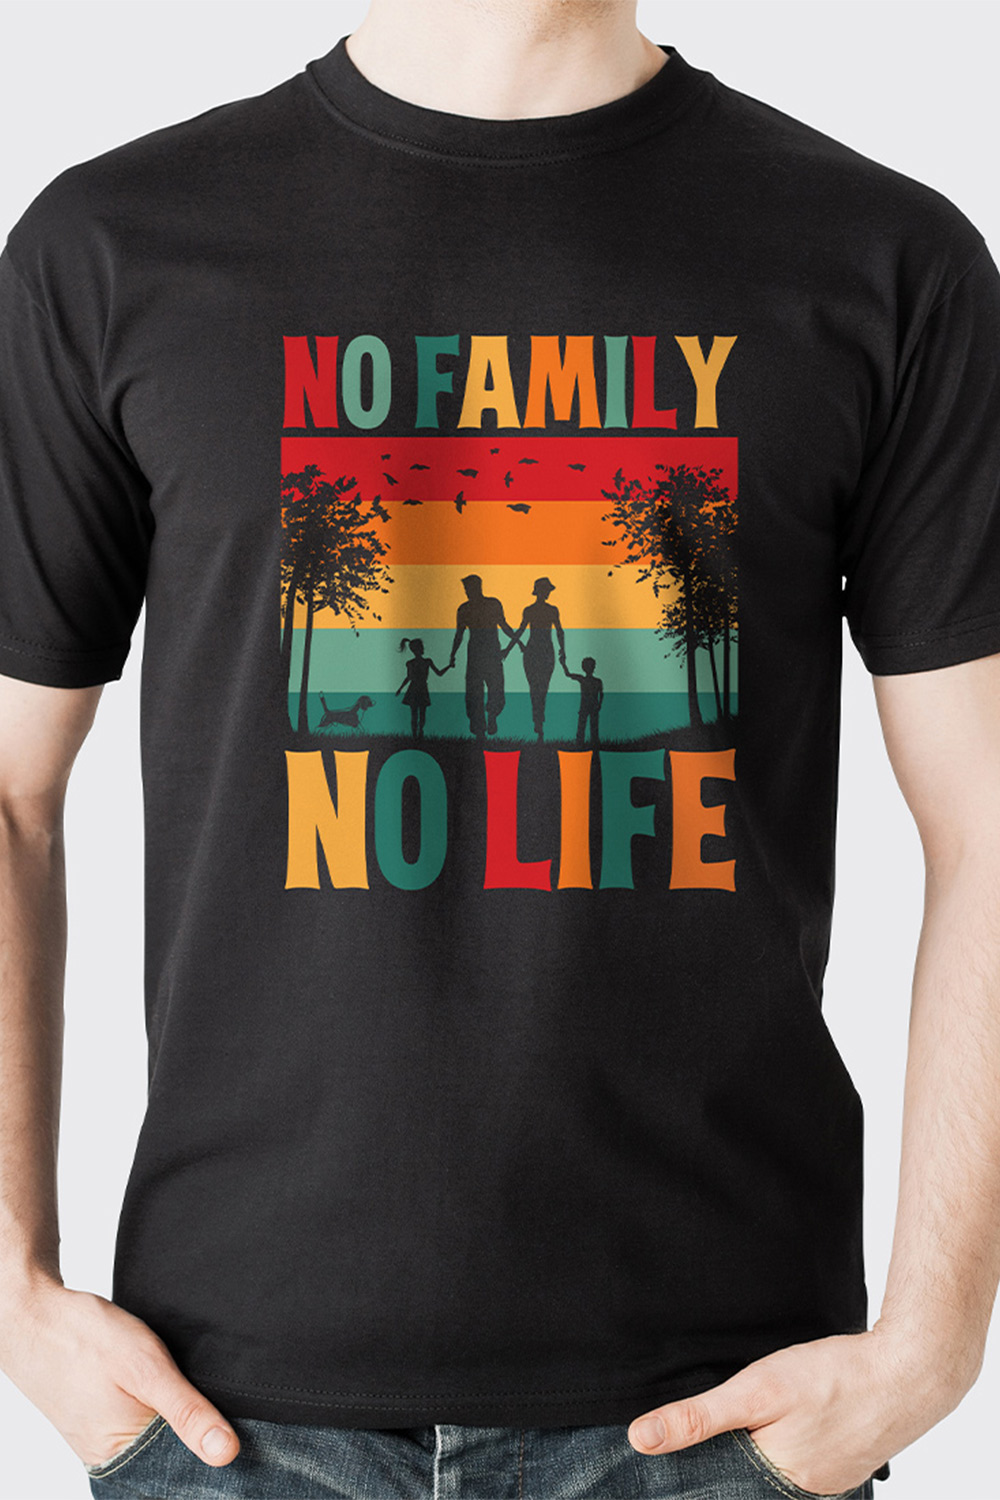 family t shirt pinterest preview image.